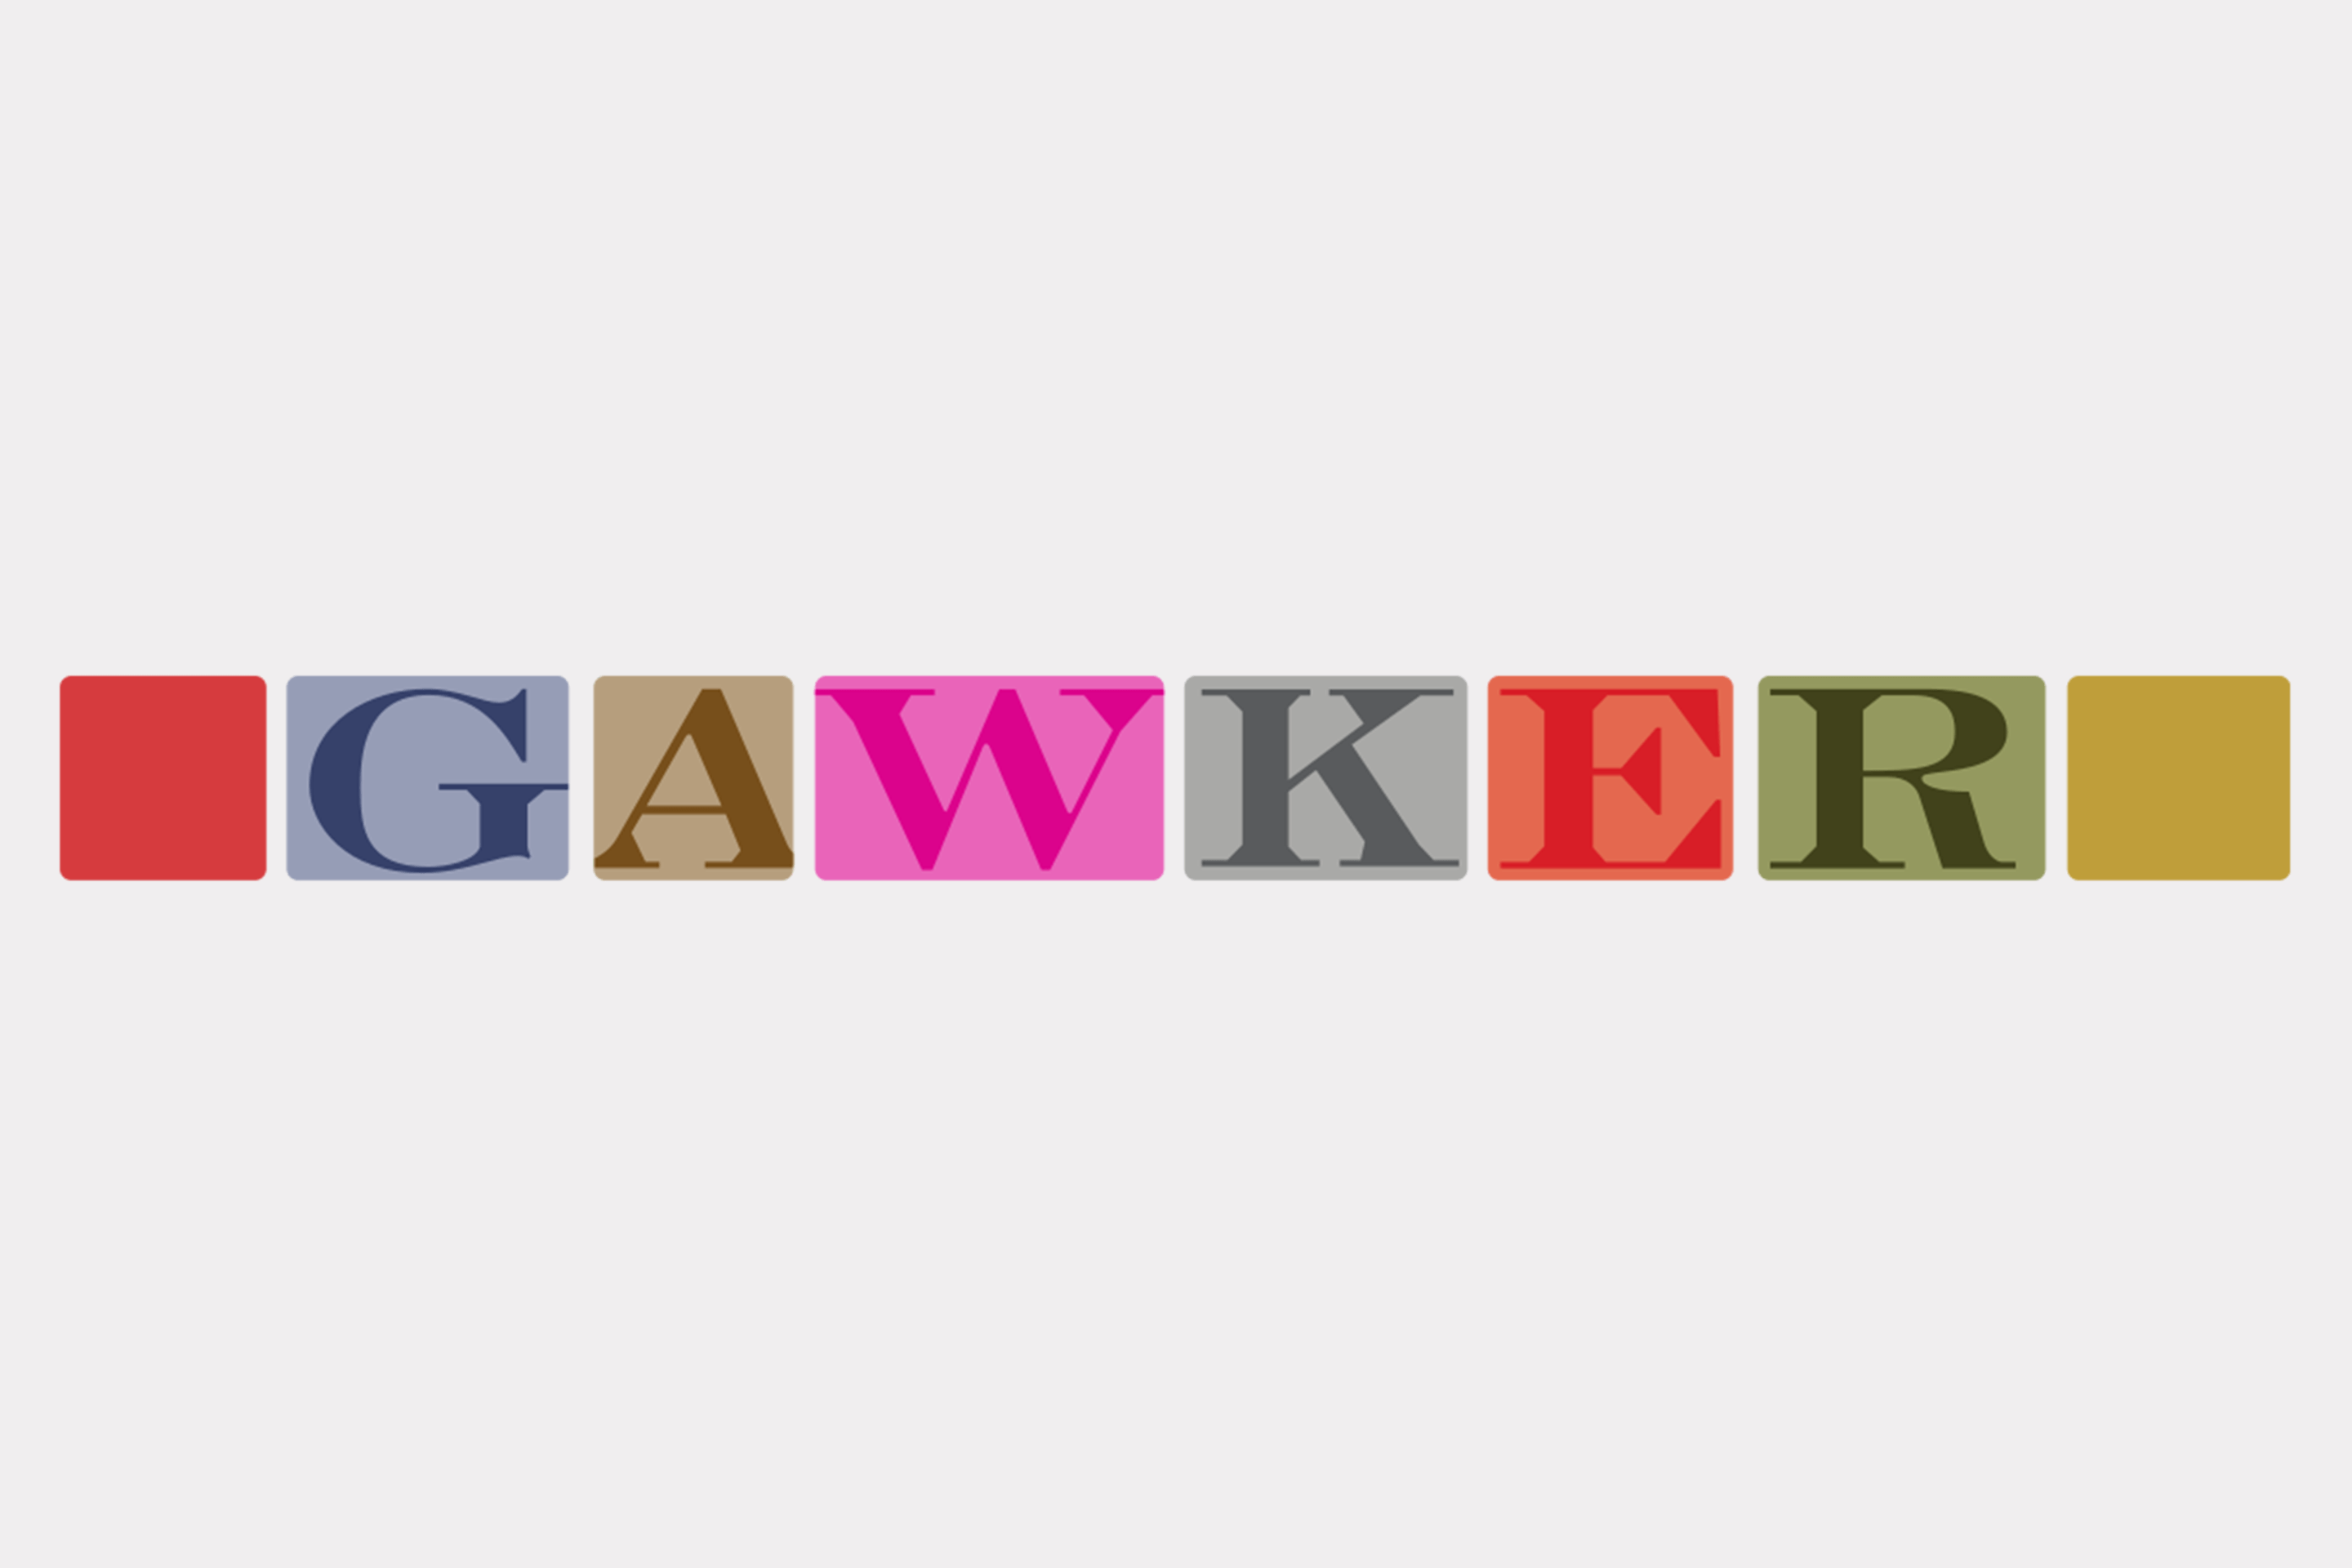 Gawker Logo - Gawker to Relaunch Under New Owner in Early 2019 | Fortune